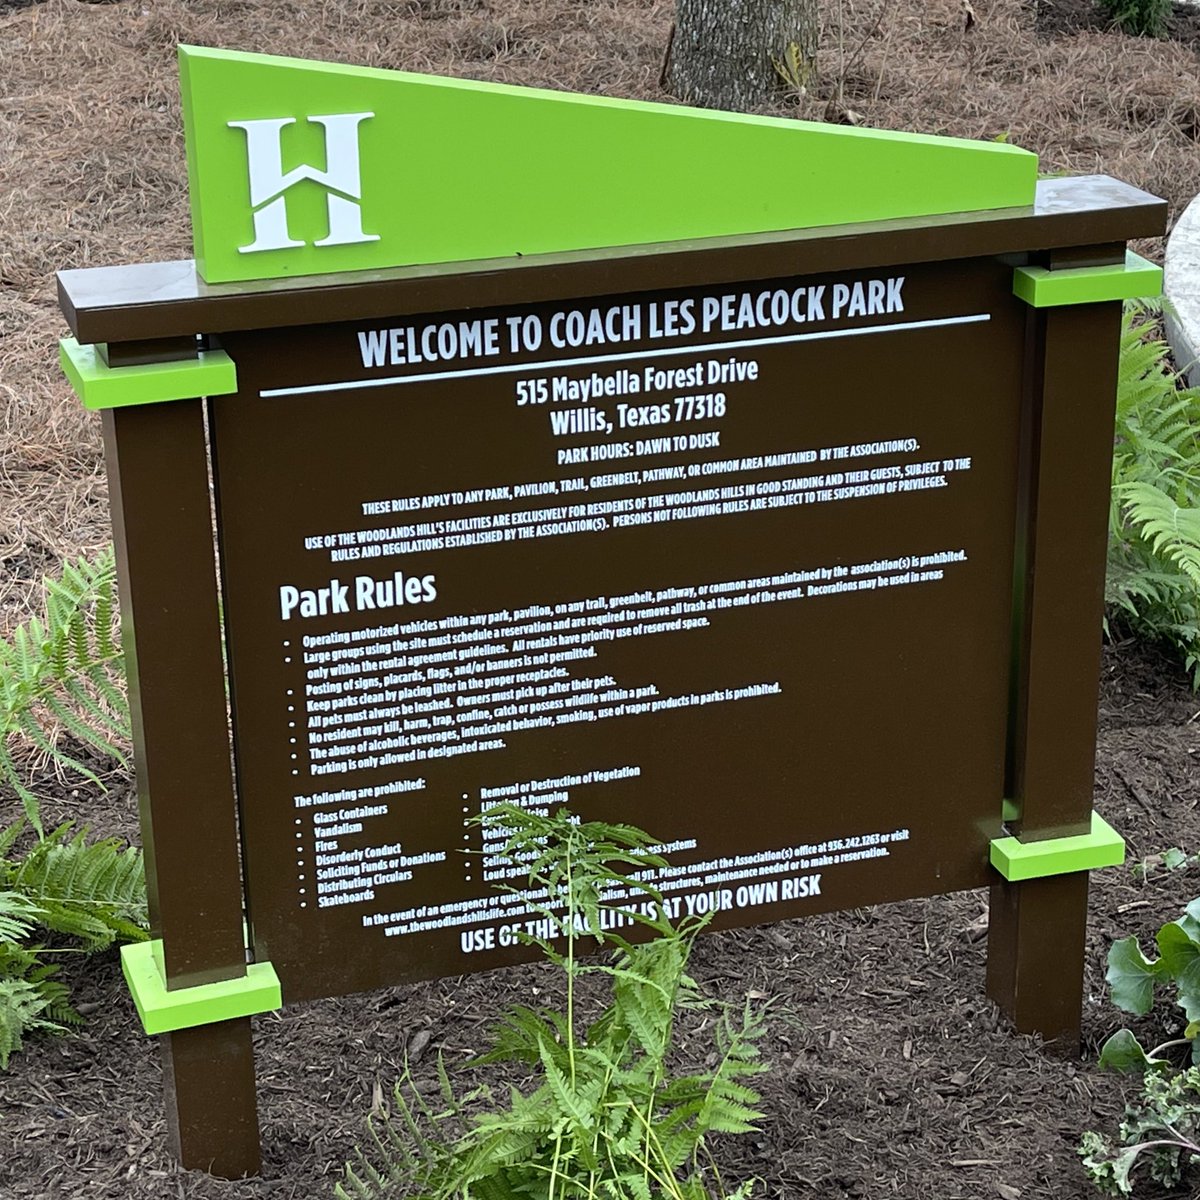 Special morning @HillsWoodlands with the park dedication for Coach Les Peacock. https://t.co/EPdvqkynTH